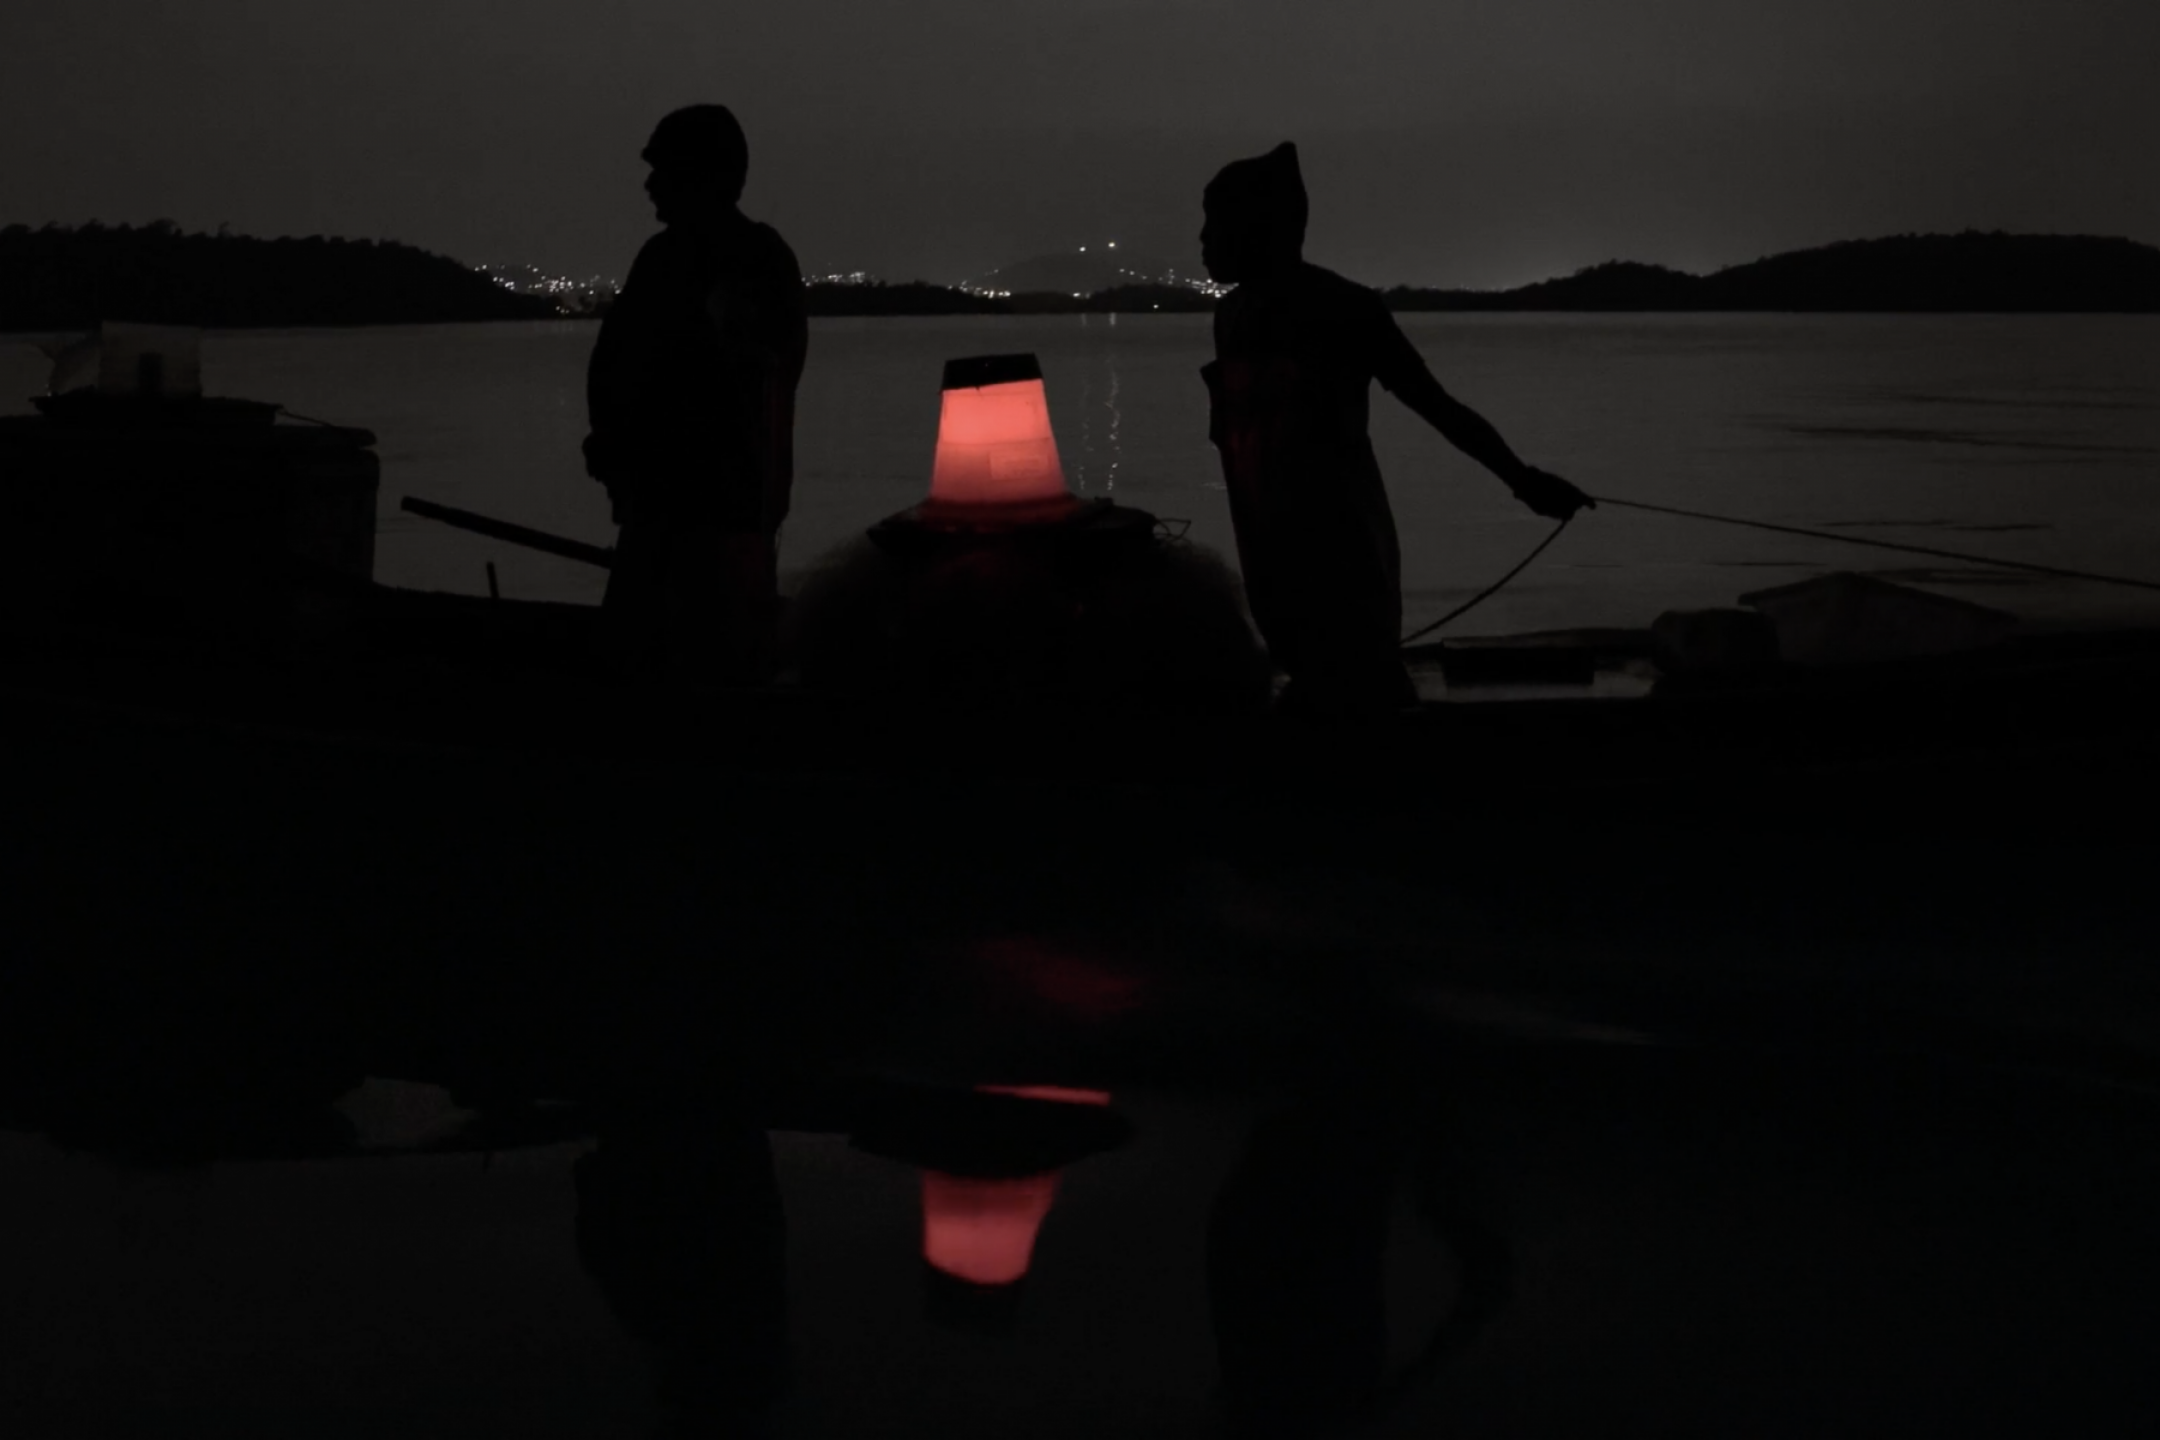 A night scene: Two persons are standing on a small boat, in the background the shapes of a bay are visible. The only light is a small lantern on the boat.